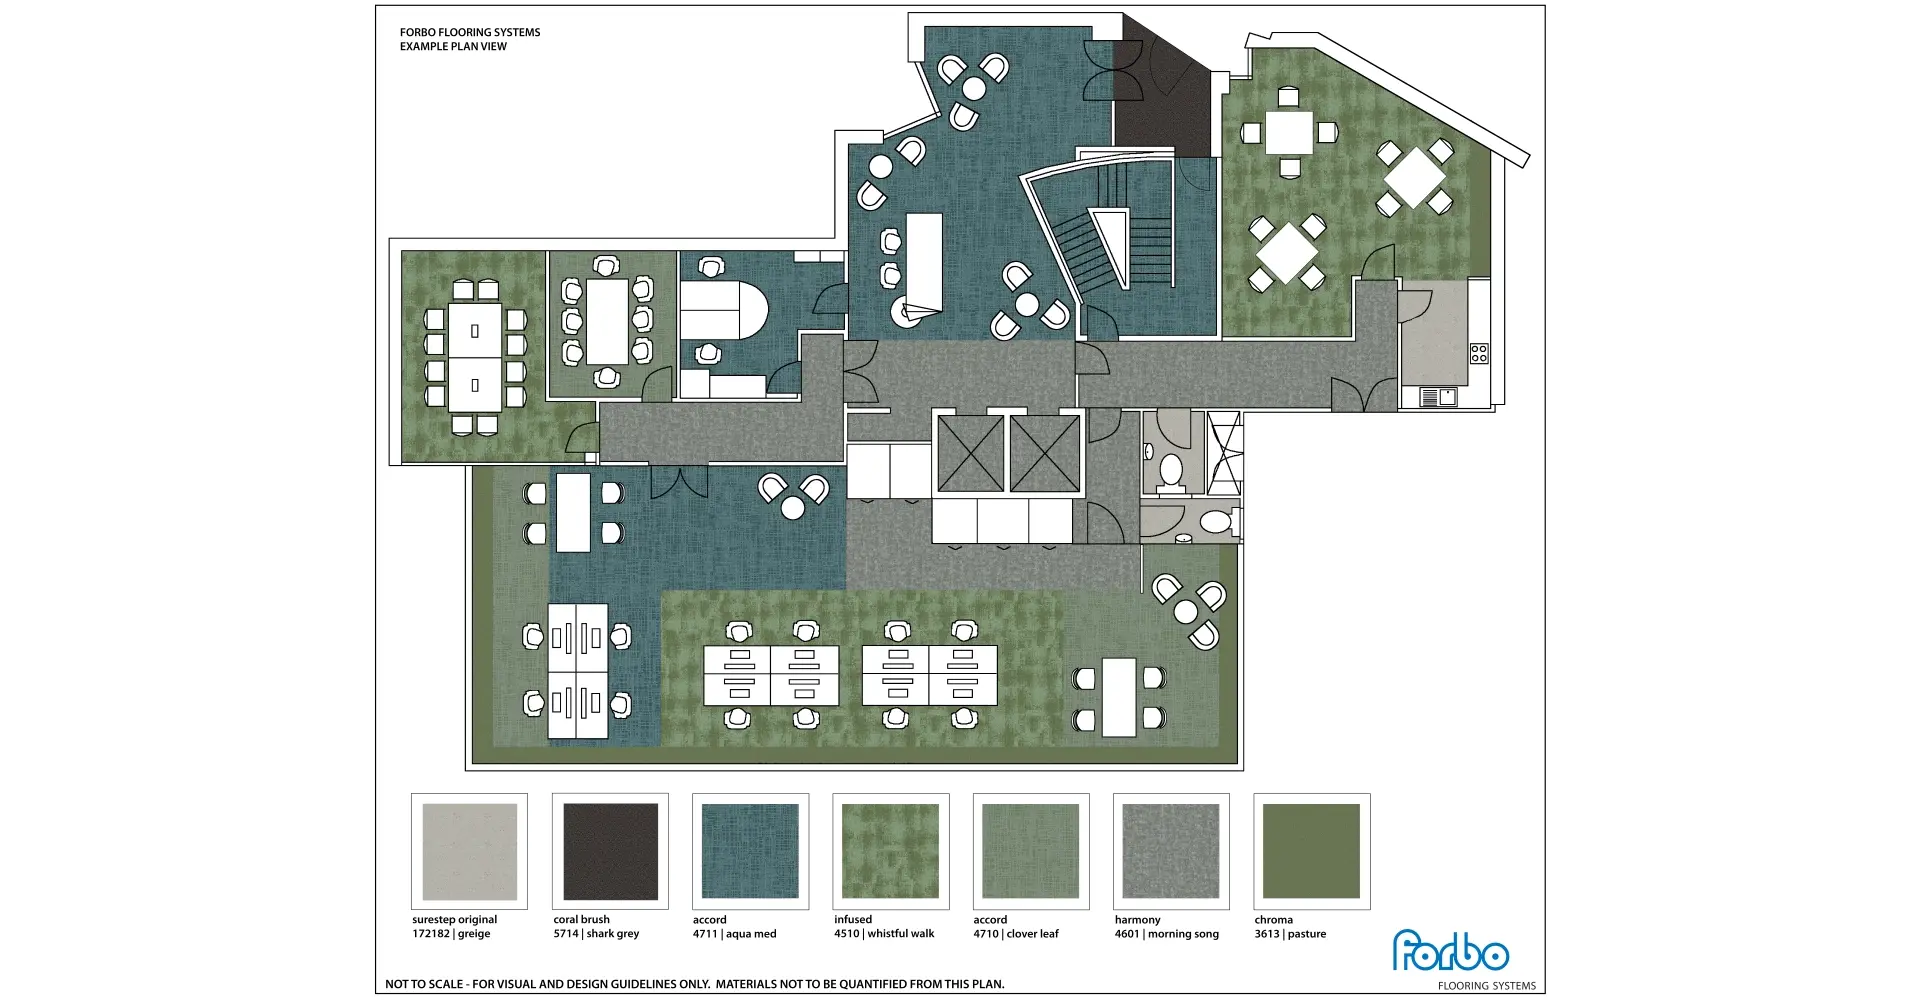 Example of a Forbo Plan Design Service Floor Plan